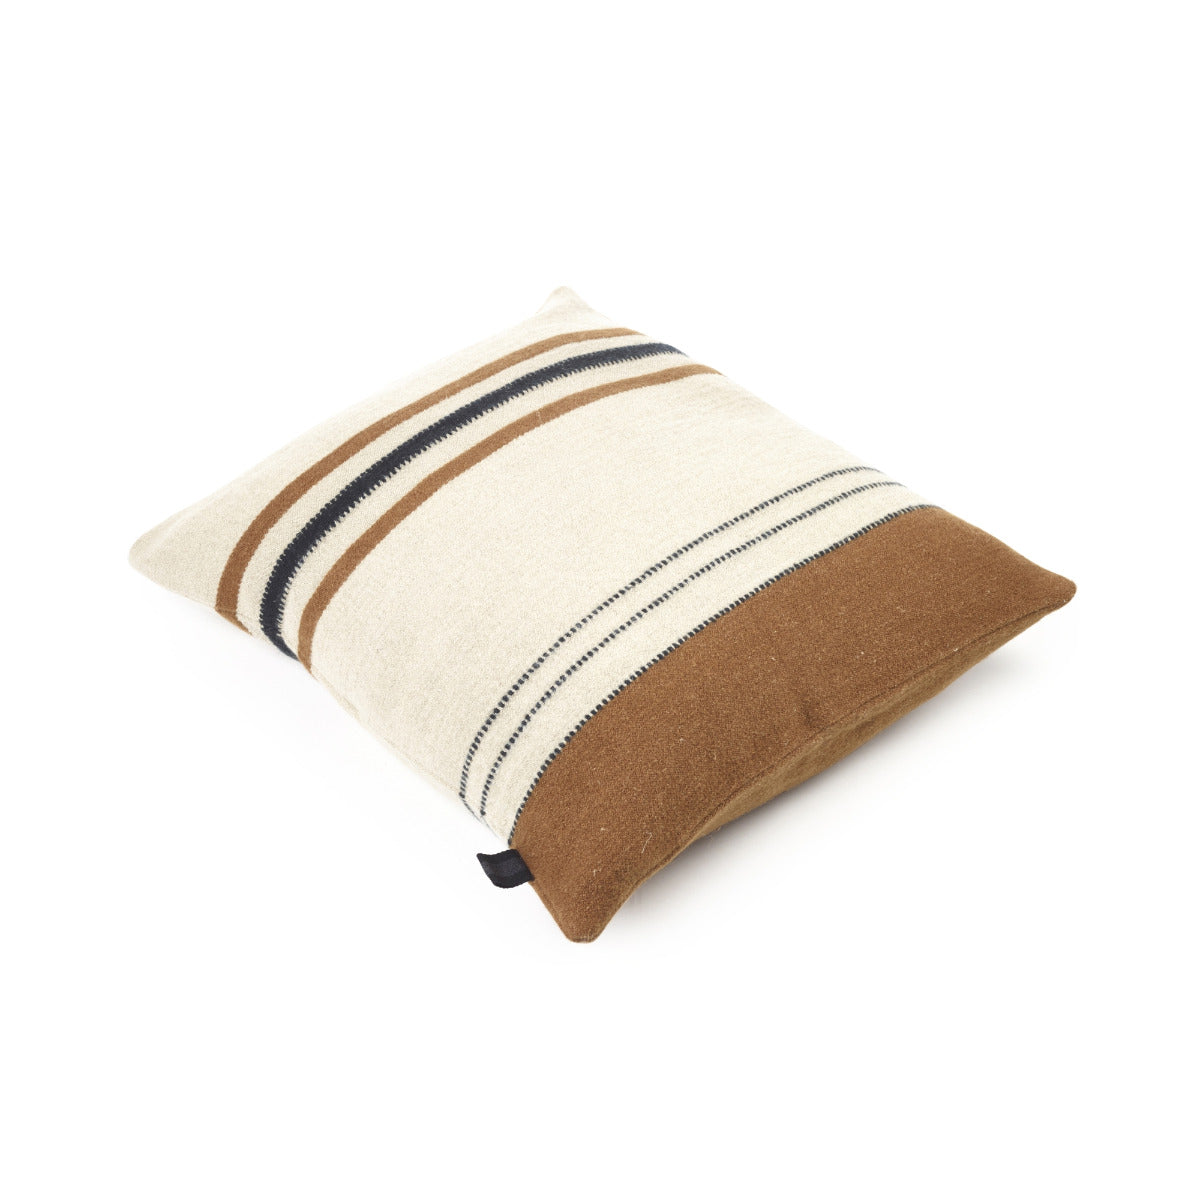 FOUNDRY PILLOW - BEESWAX STRIPE - $210.00